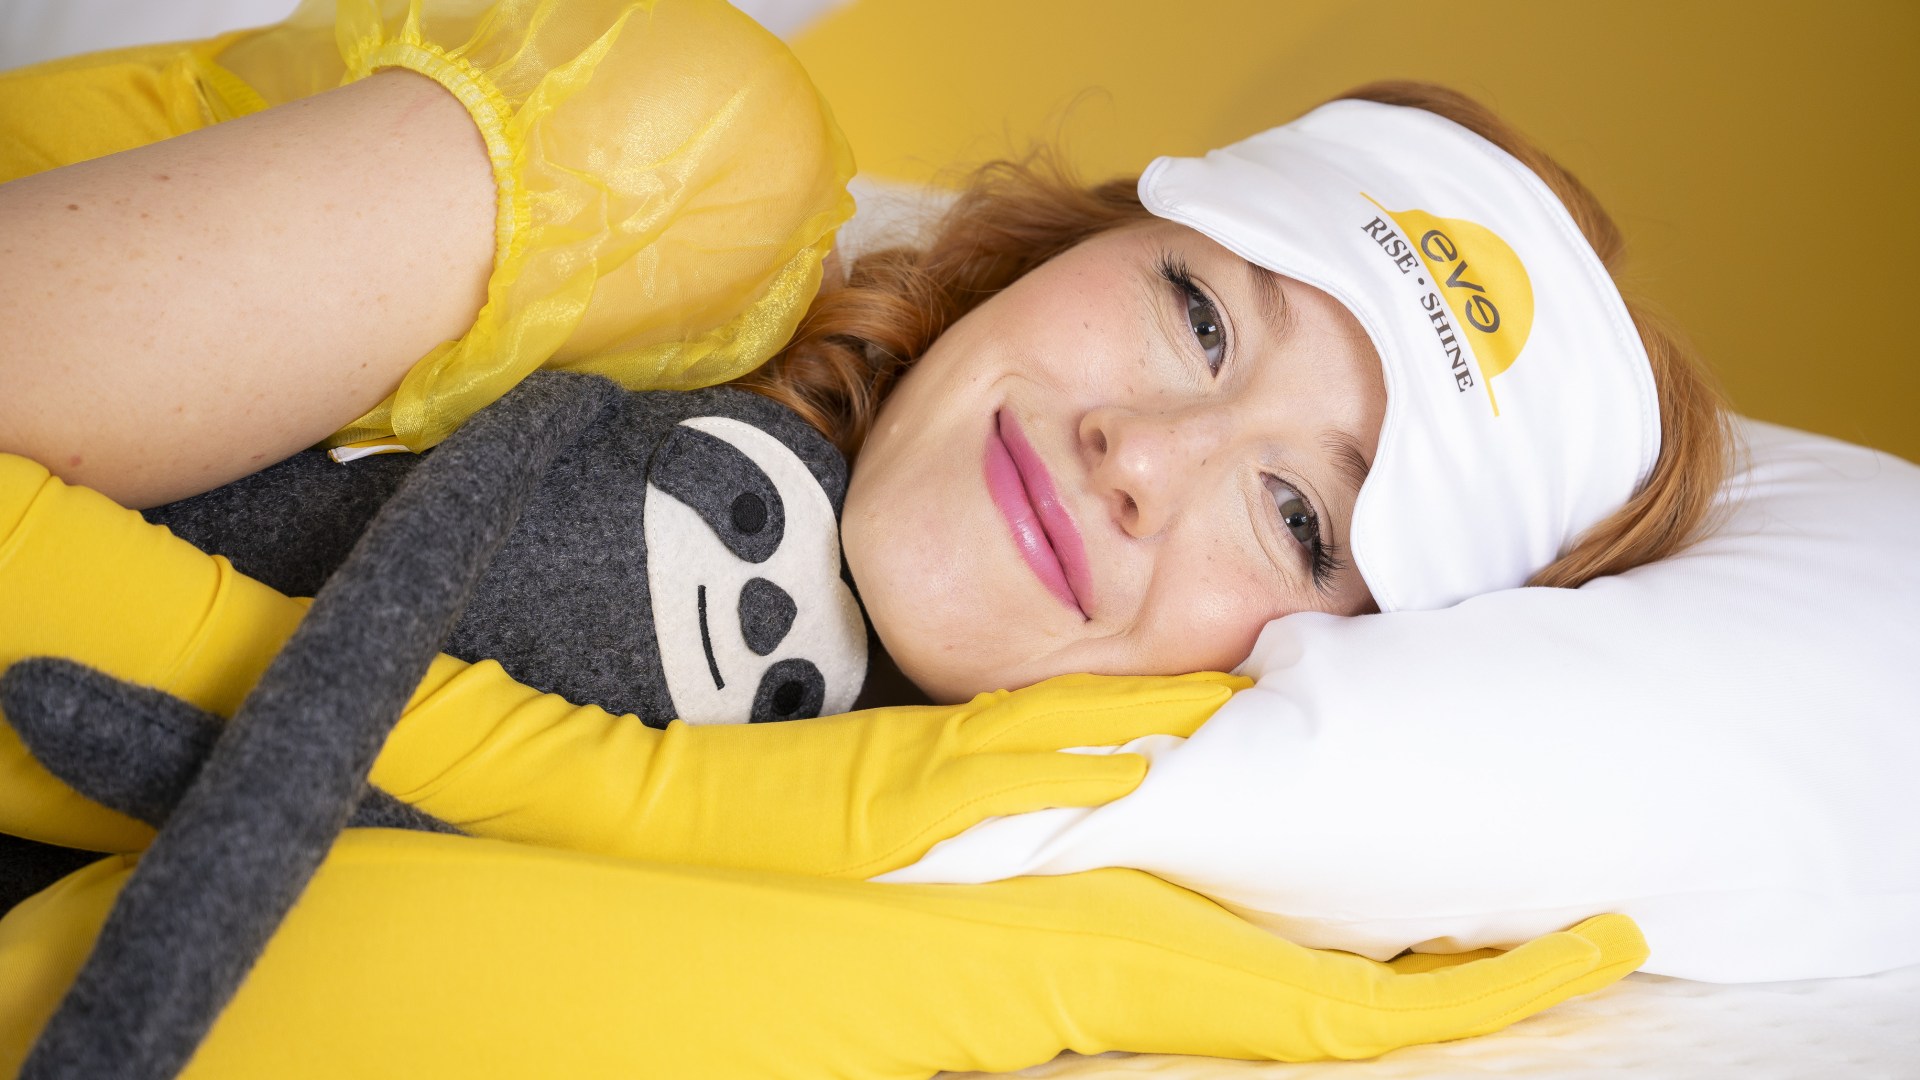 One in four Brits say they prefer a firm mattress to sleeping on a softer one [Video]